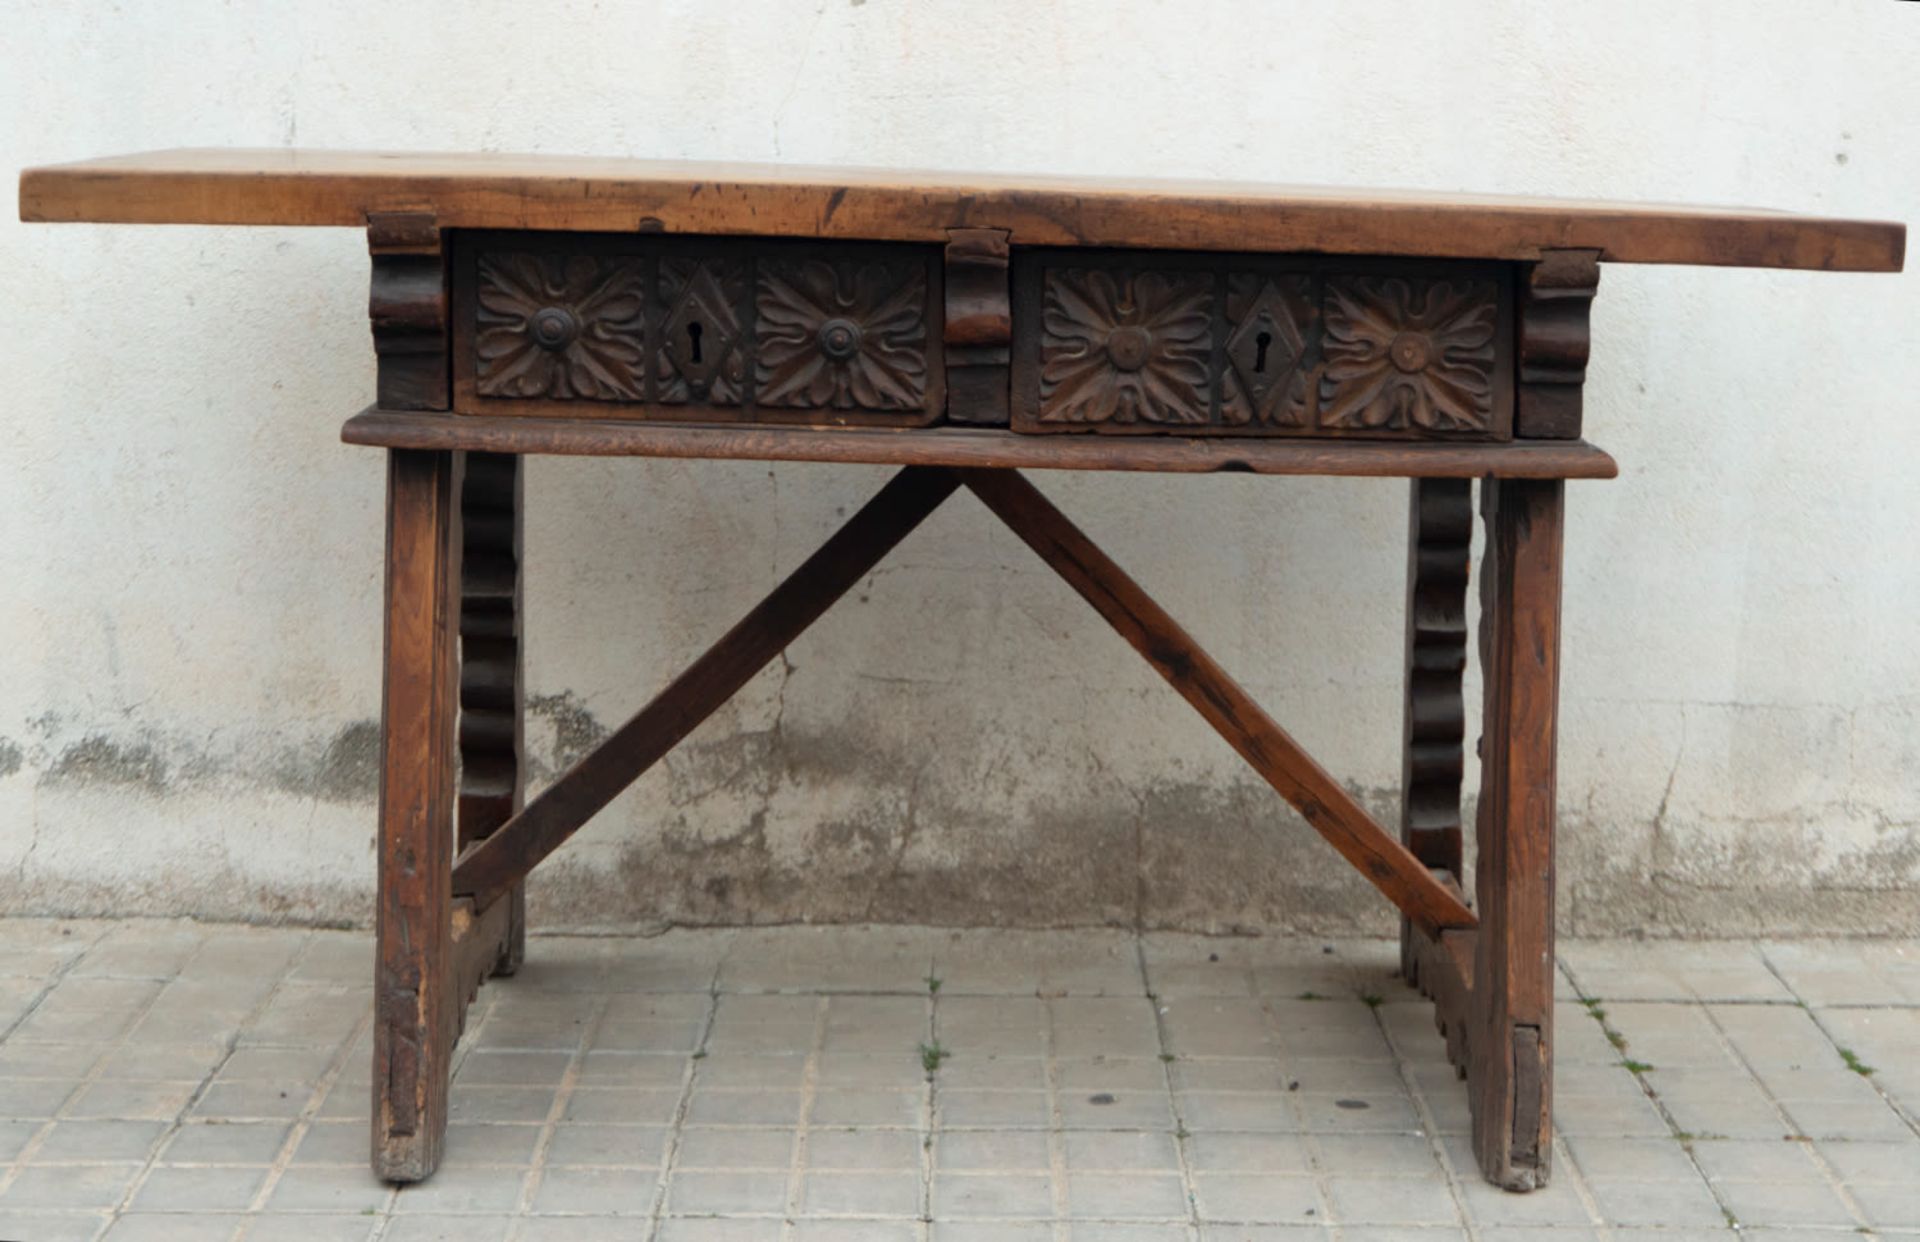 Tyrolean or German kitchen table from Bavaria in oak wood from the 16th century, Swiss or German Ren